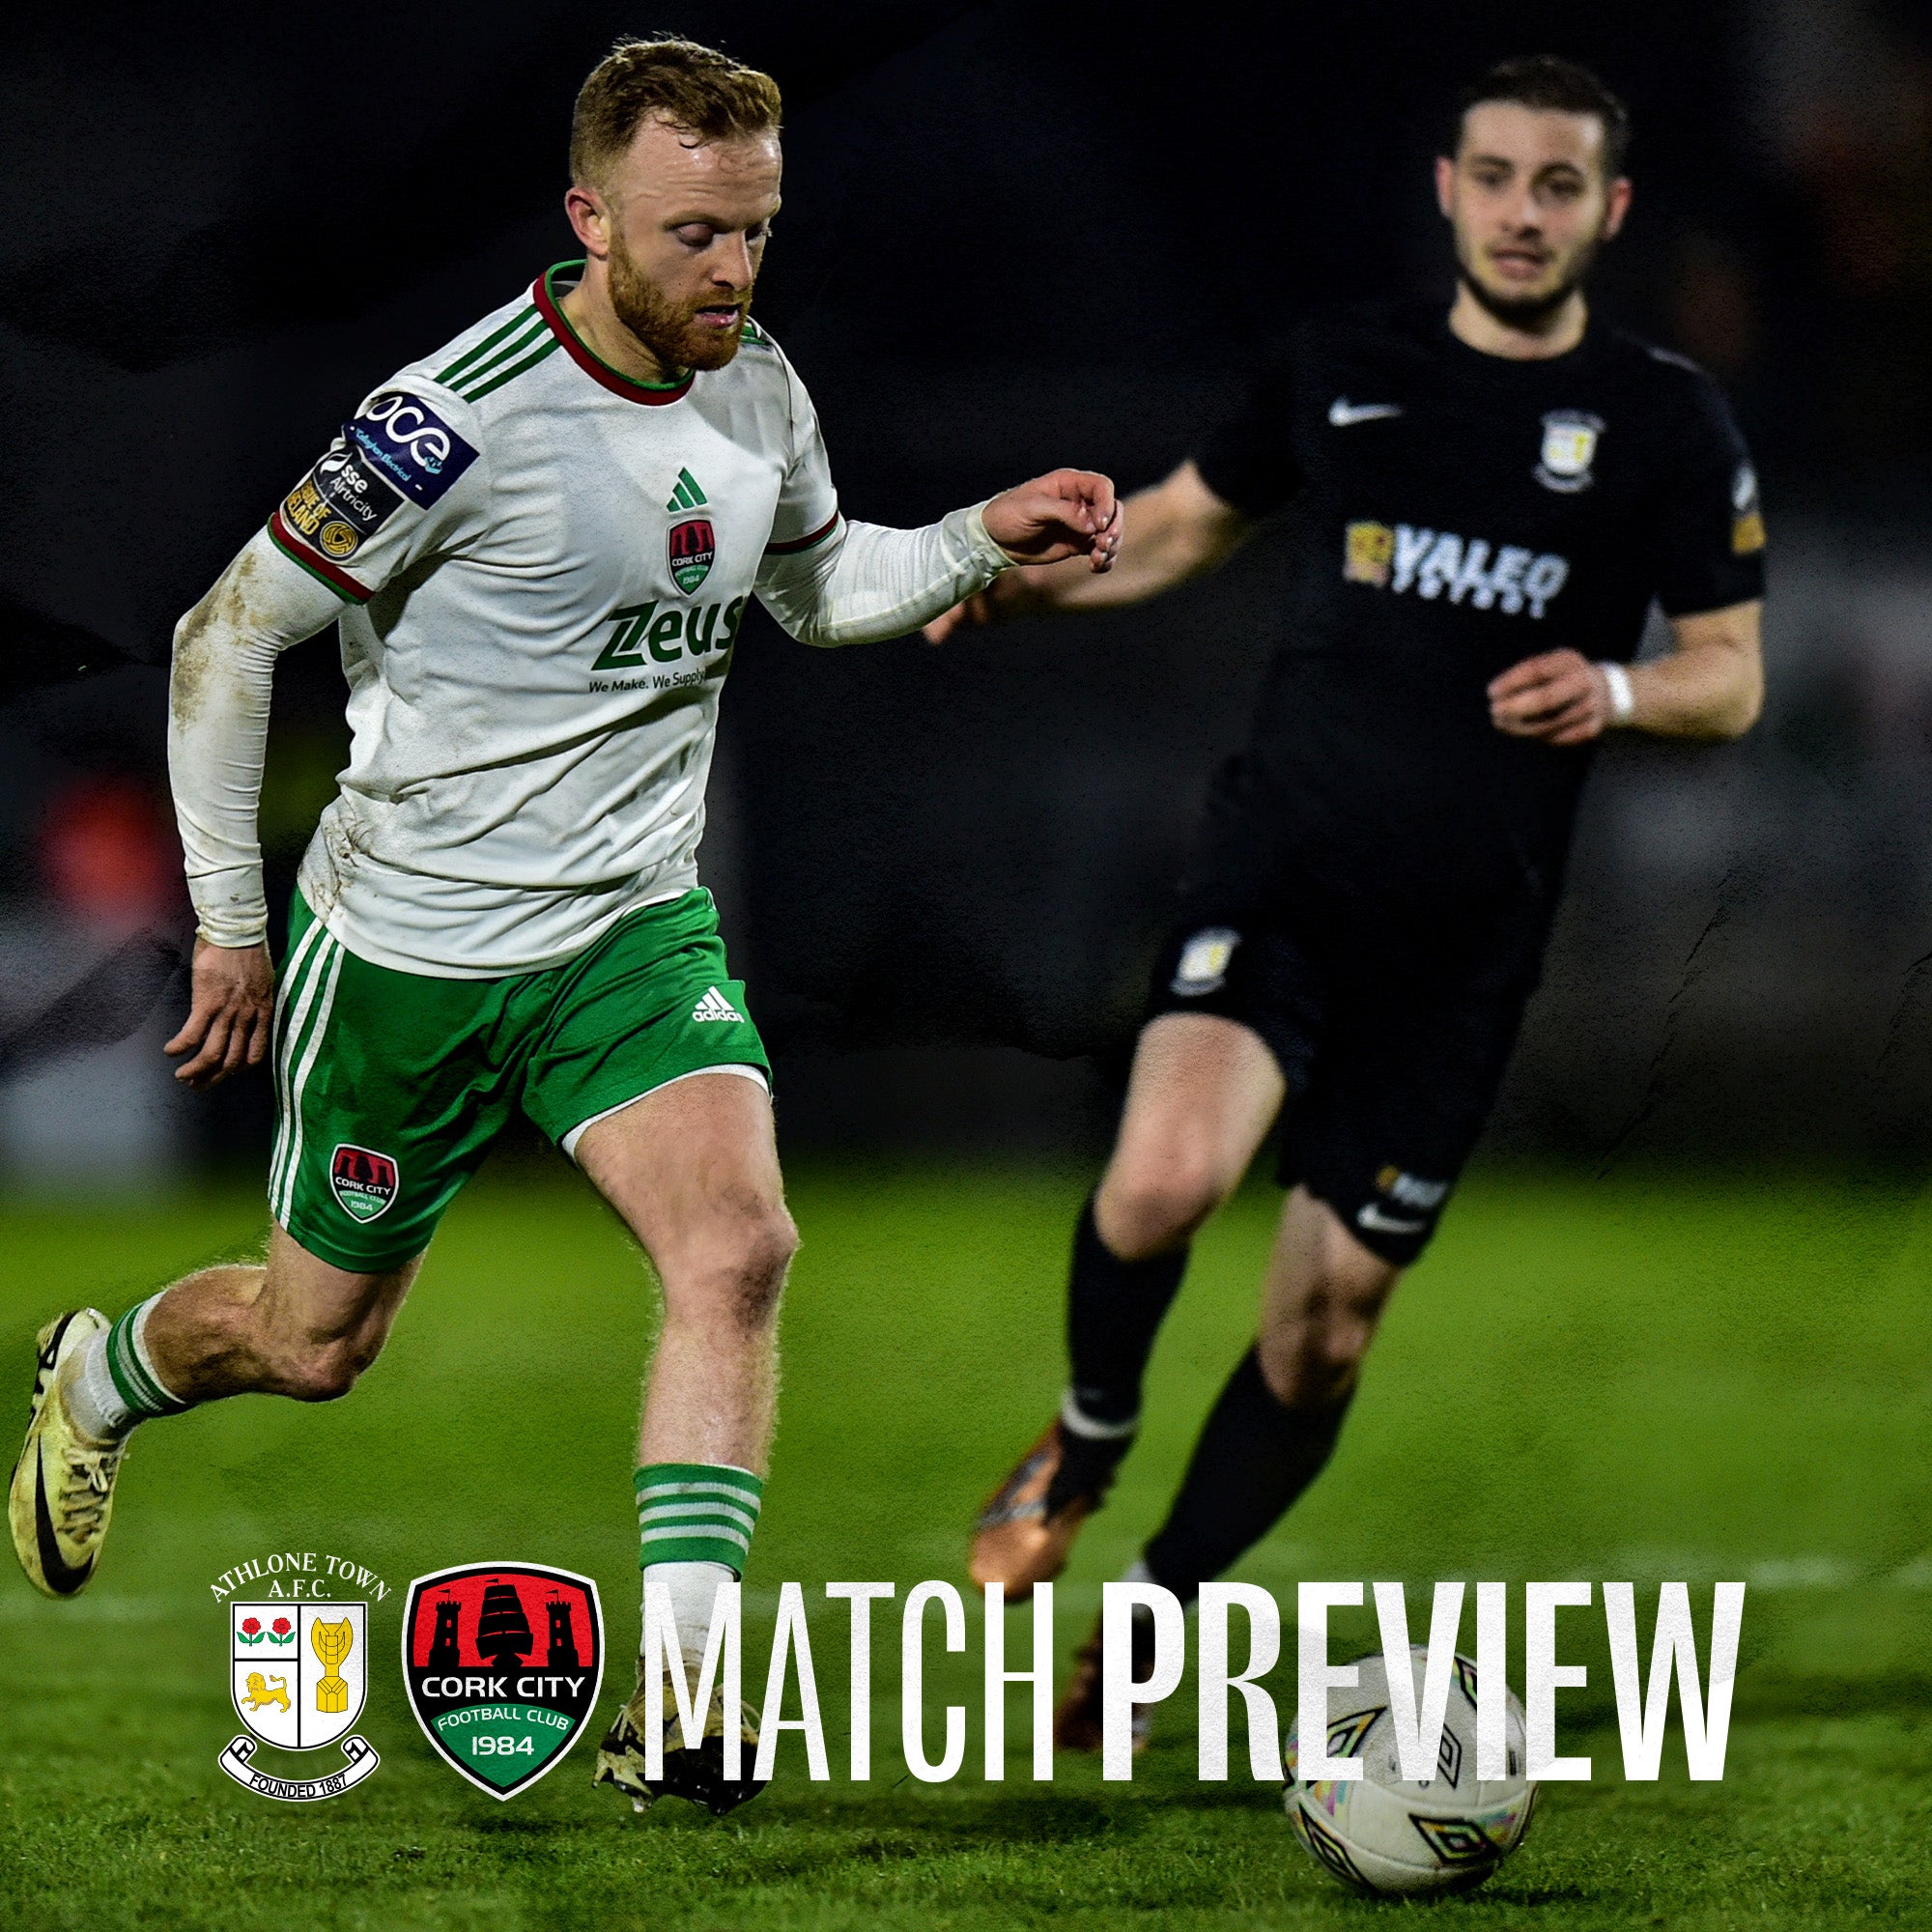 Match Preview: Athlone Town vs Cork City